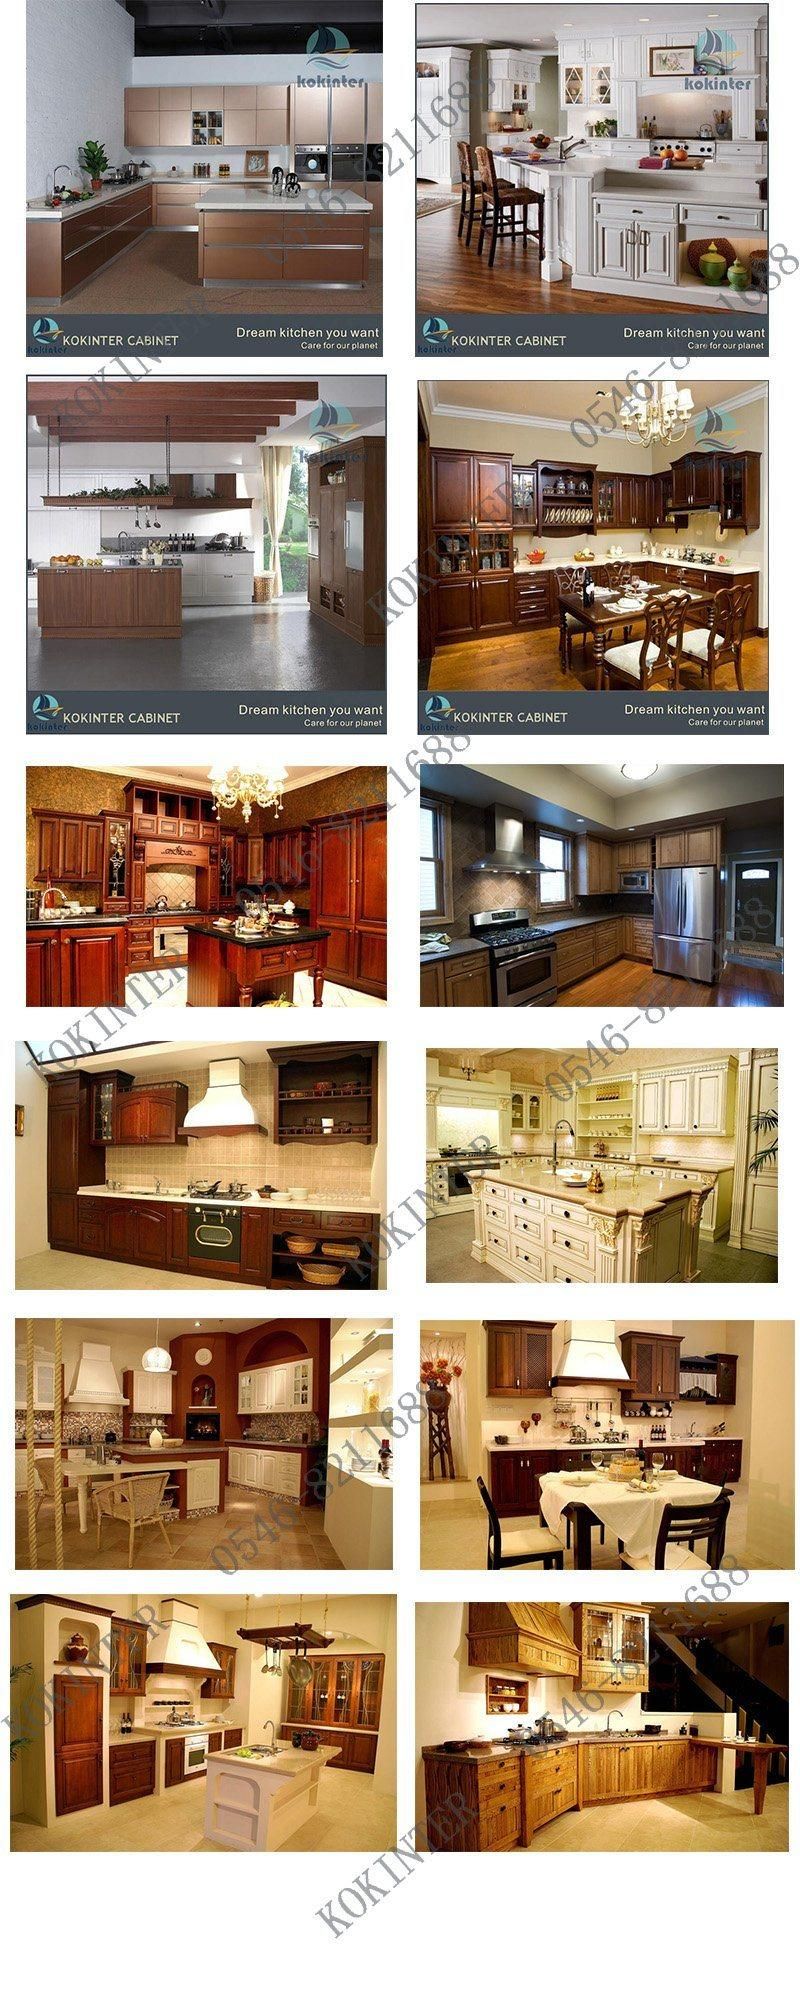 Canada Project New Design Soild Wood Kitchen Cabinet